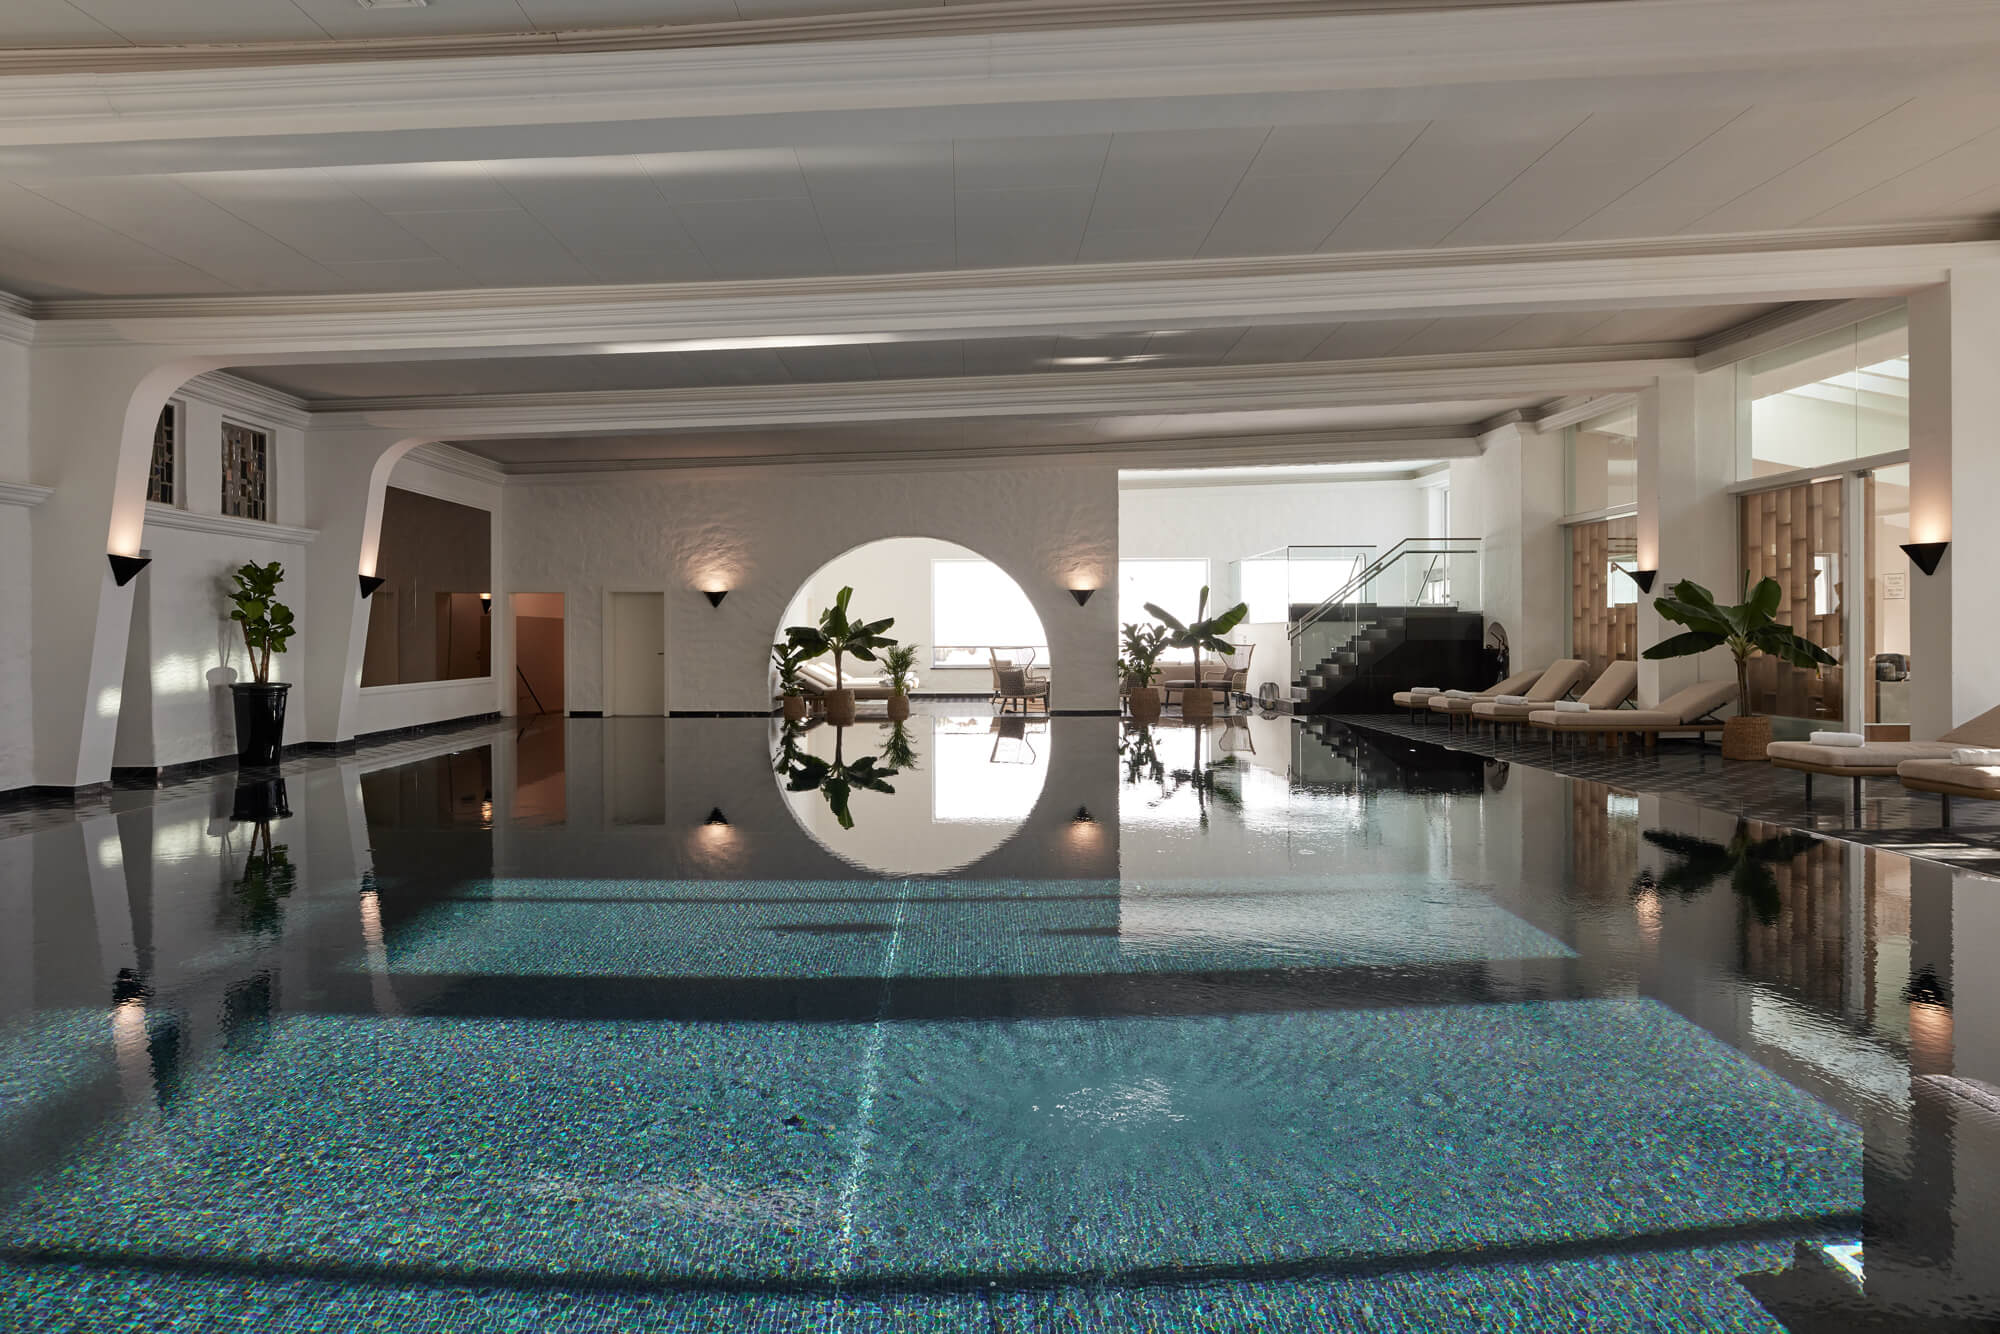 A pool with 18 meters in length, modern facilities and innovative treatments, surrounded by an elega